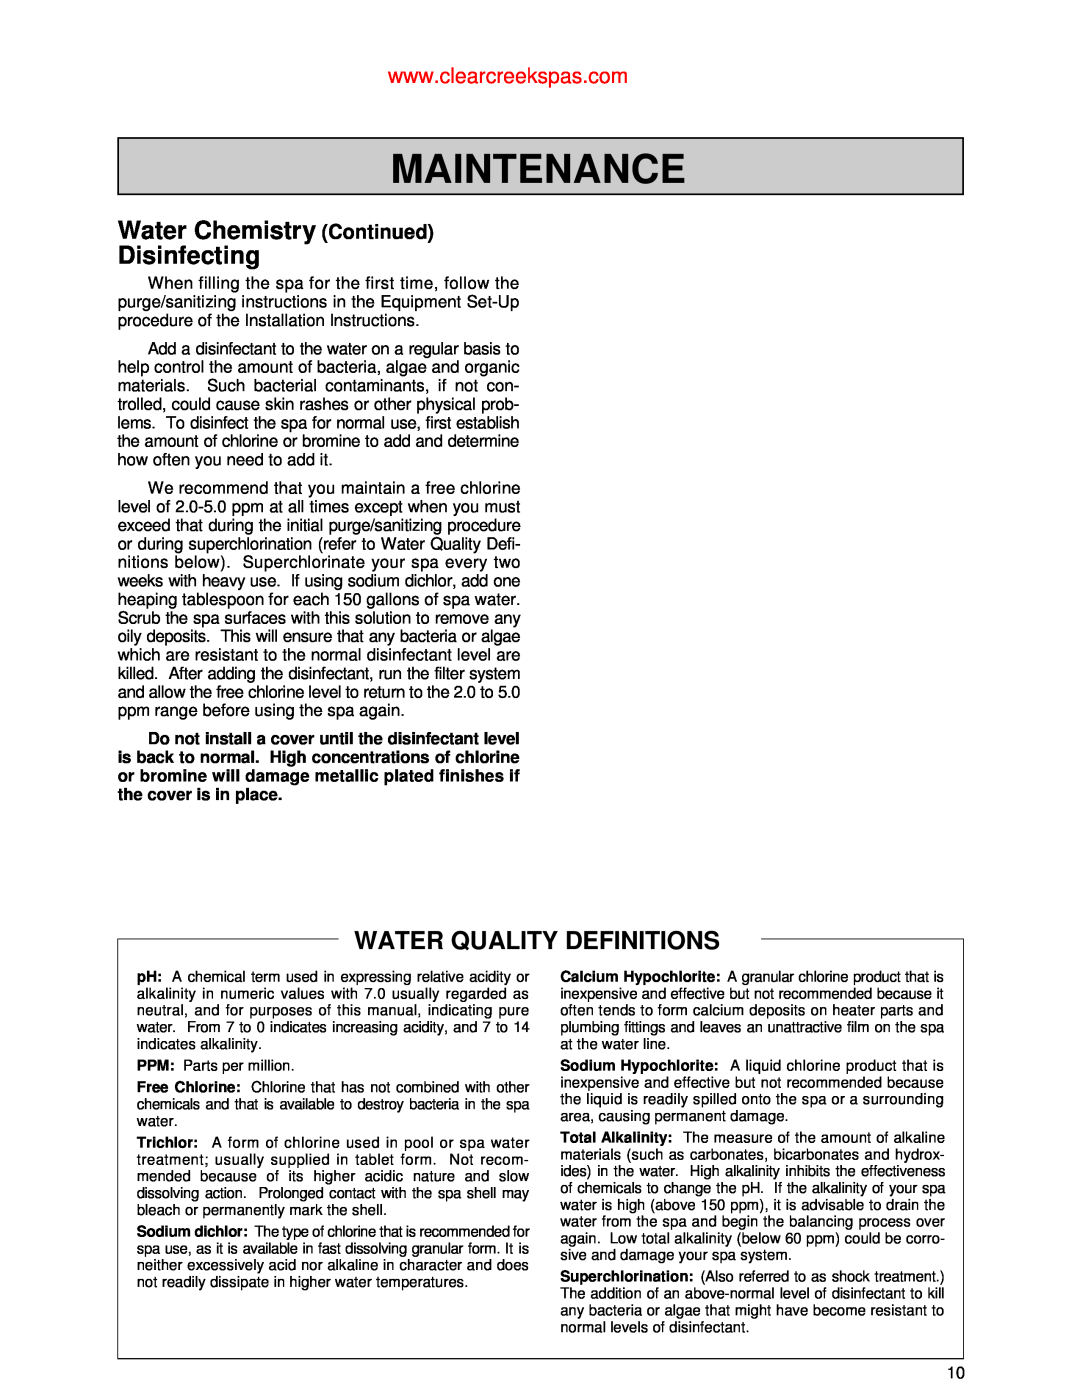 Jacuzzi Whirlpool Spa owner manual Water Chemistry Continued Disinfecting, Water Quality Definitions, Maintenance 